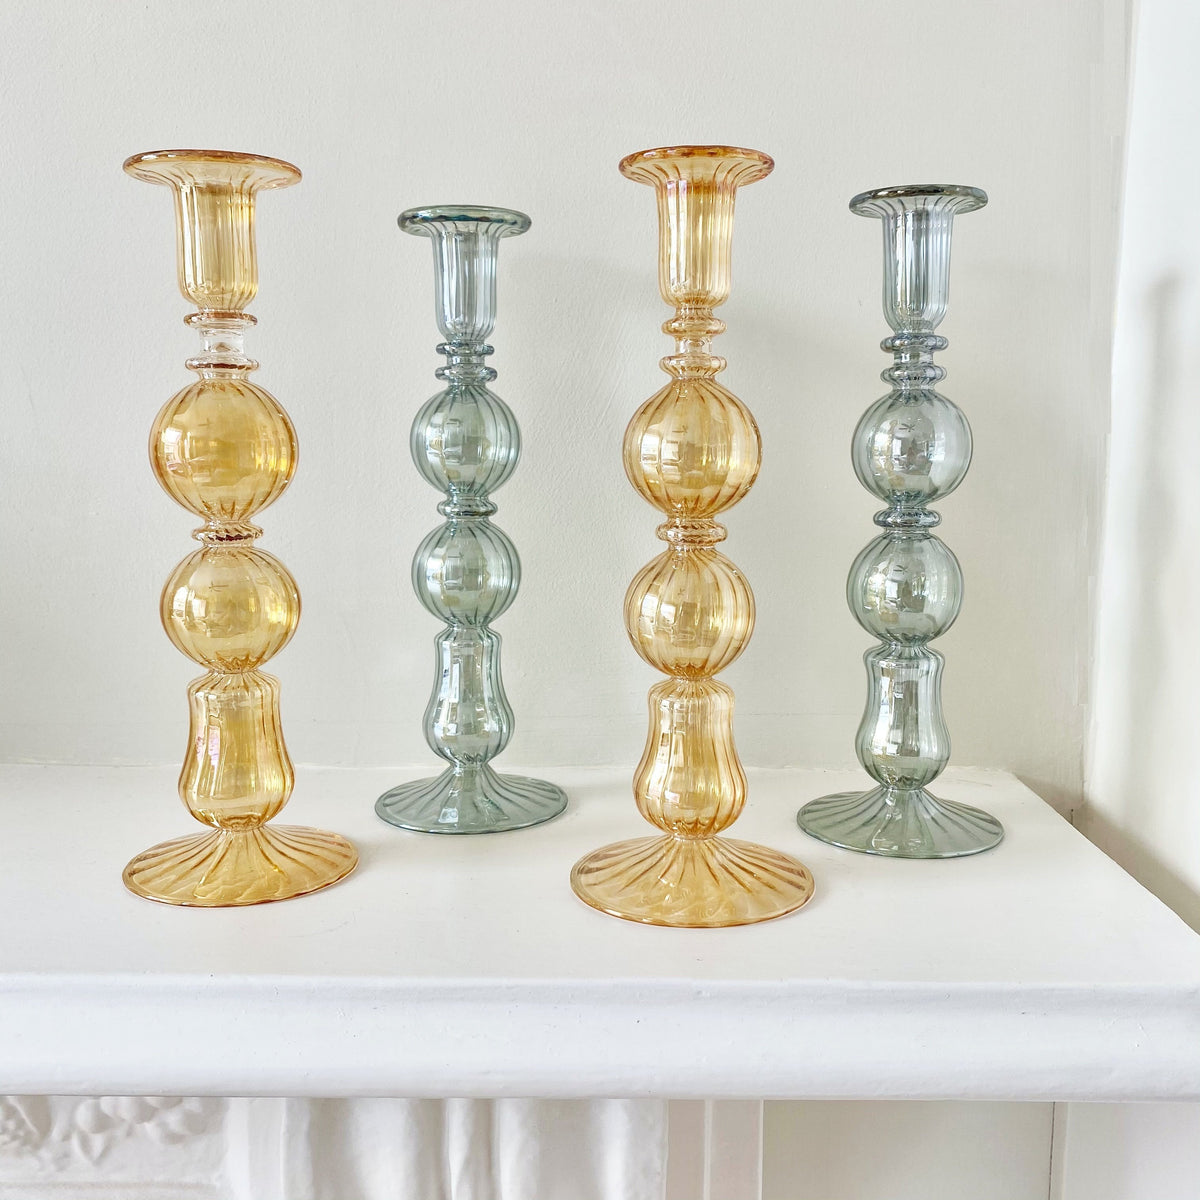 Issy Granger Yellow and Green Glass Candlesticks